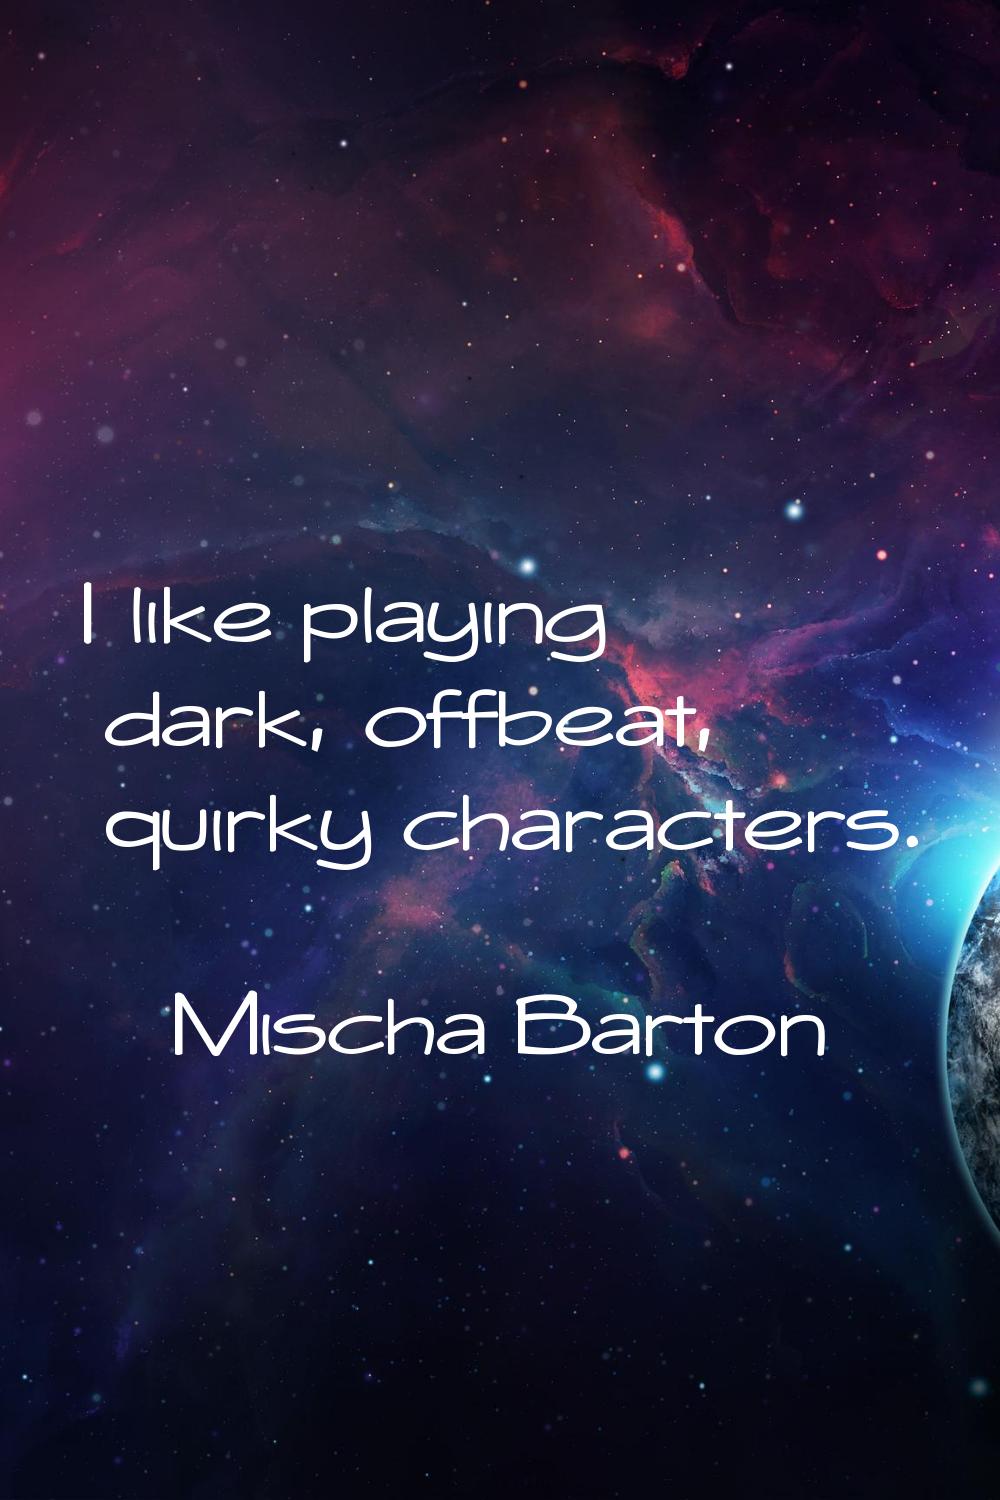 I like playing dark, offbeat, quirky characters.